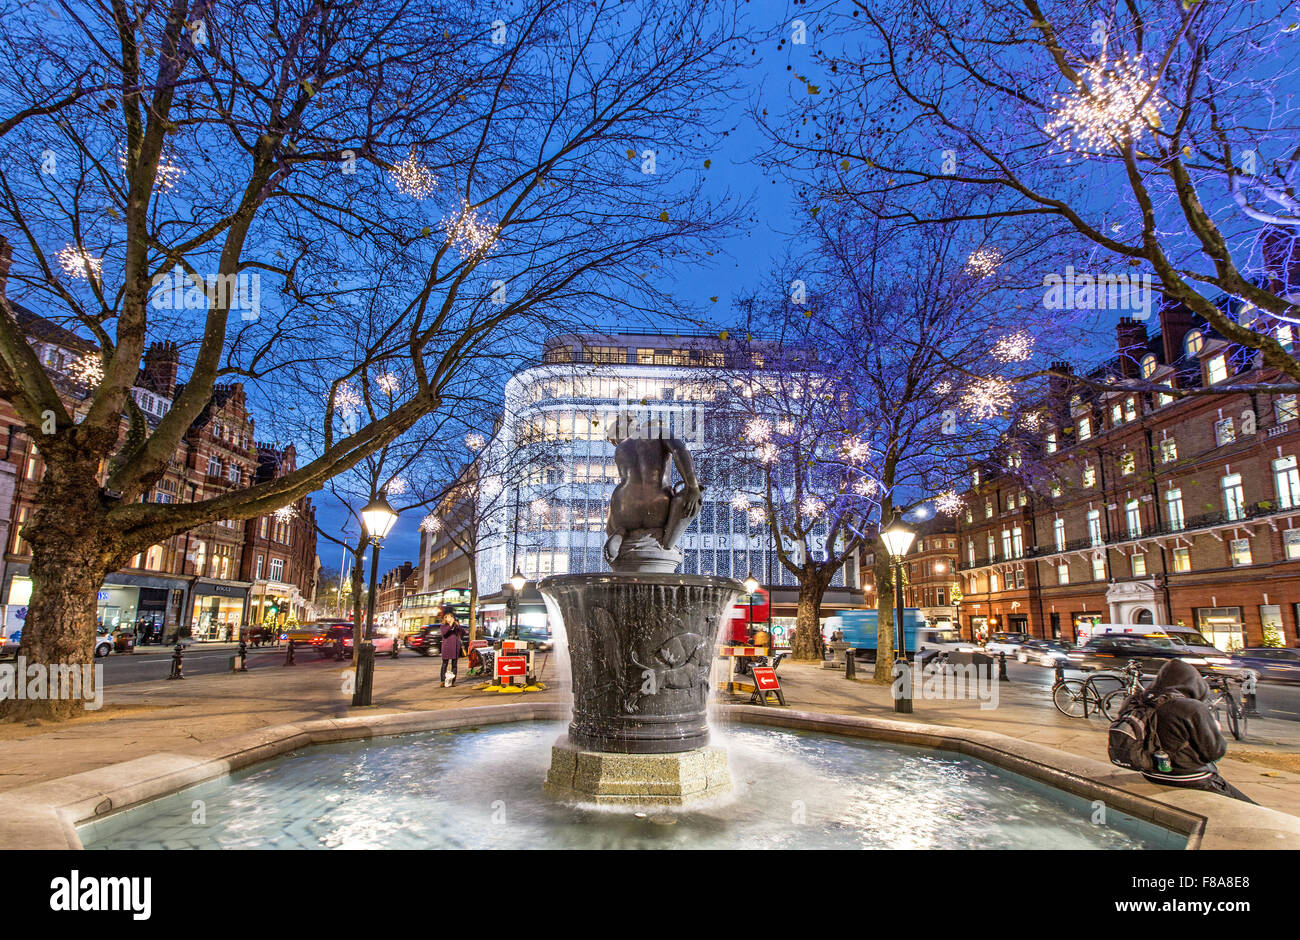 Weihnachtsbeleuchtung In Sloane Square-London-UK Stockfoto